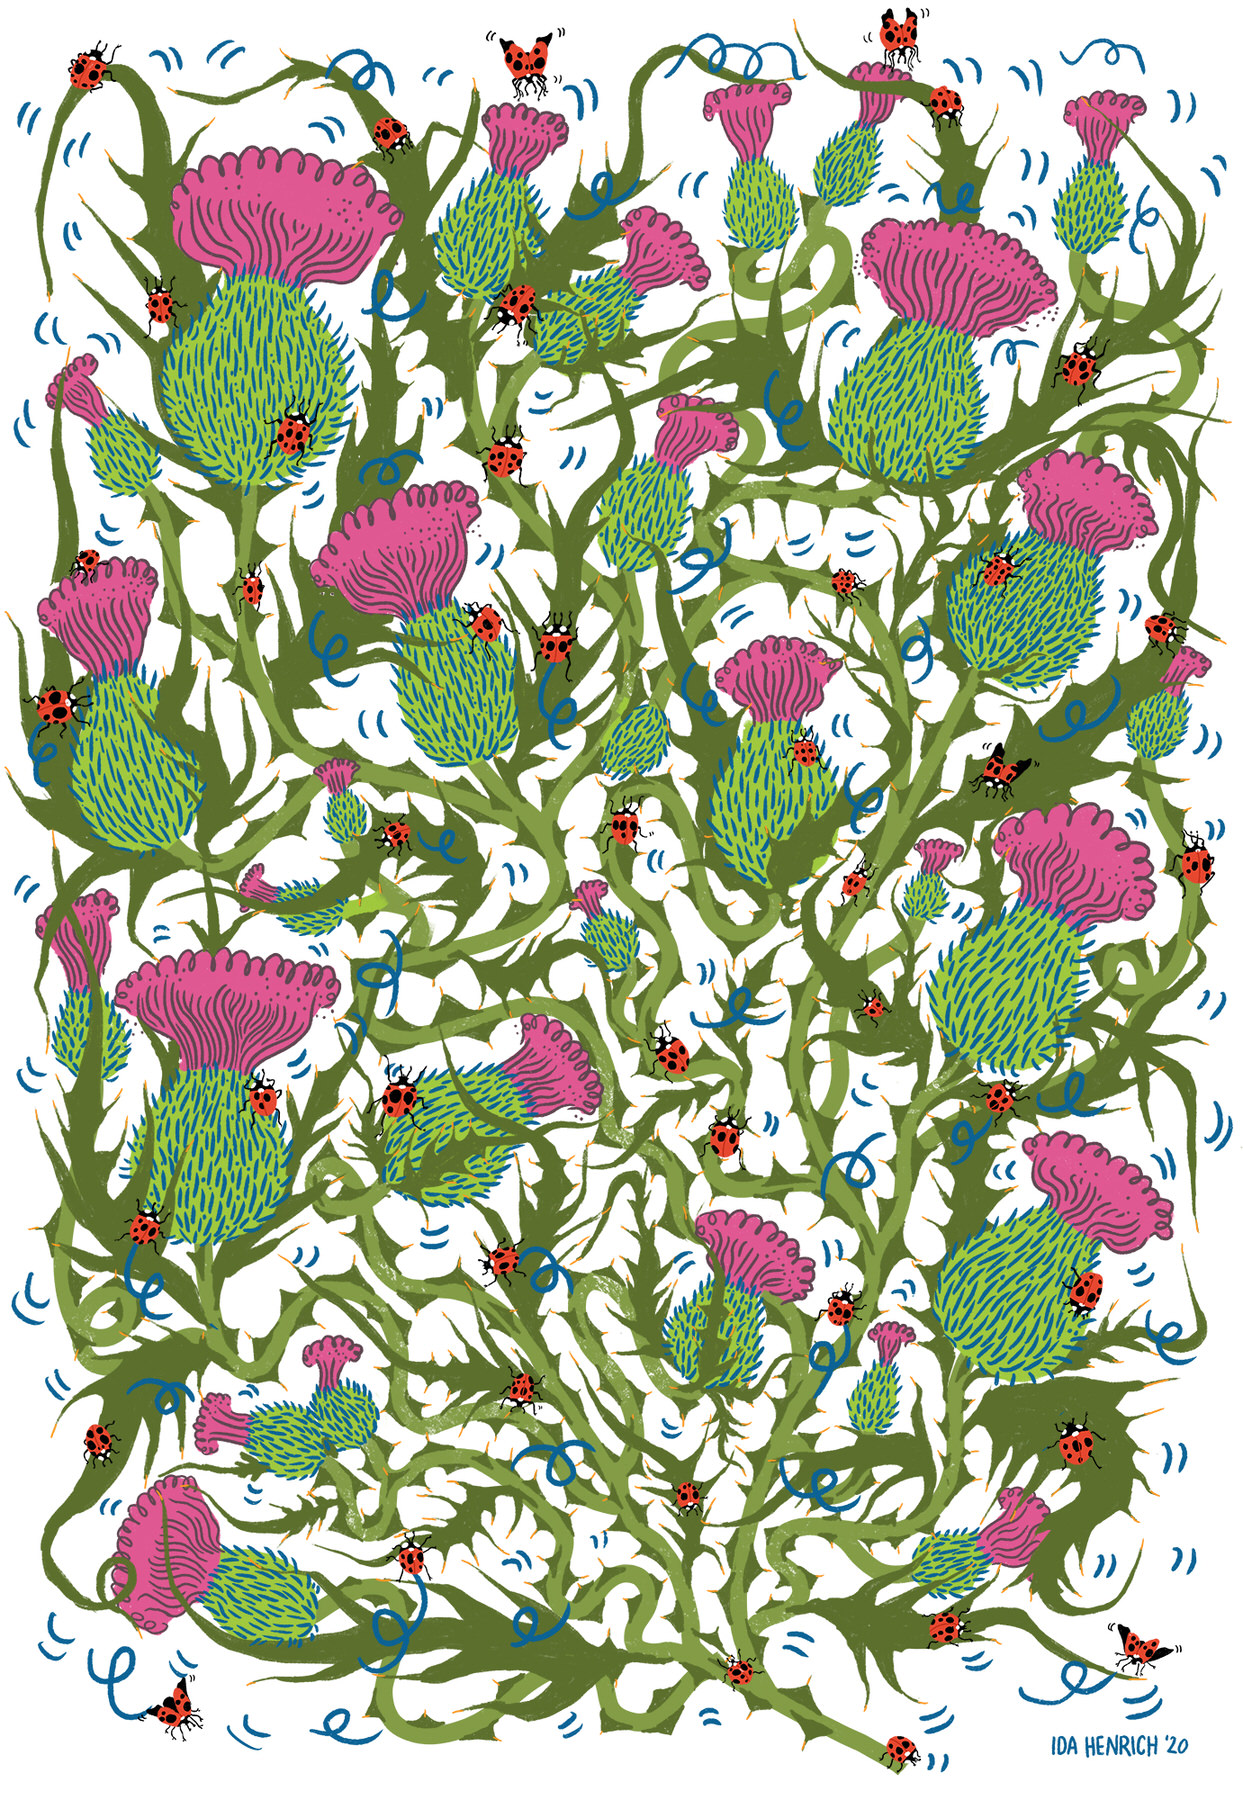 An illustrated pattern of thistles and ladybirds. ©Ida Henrich